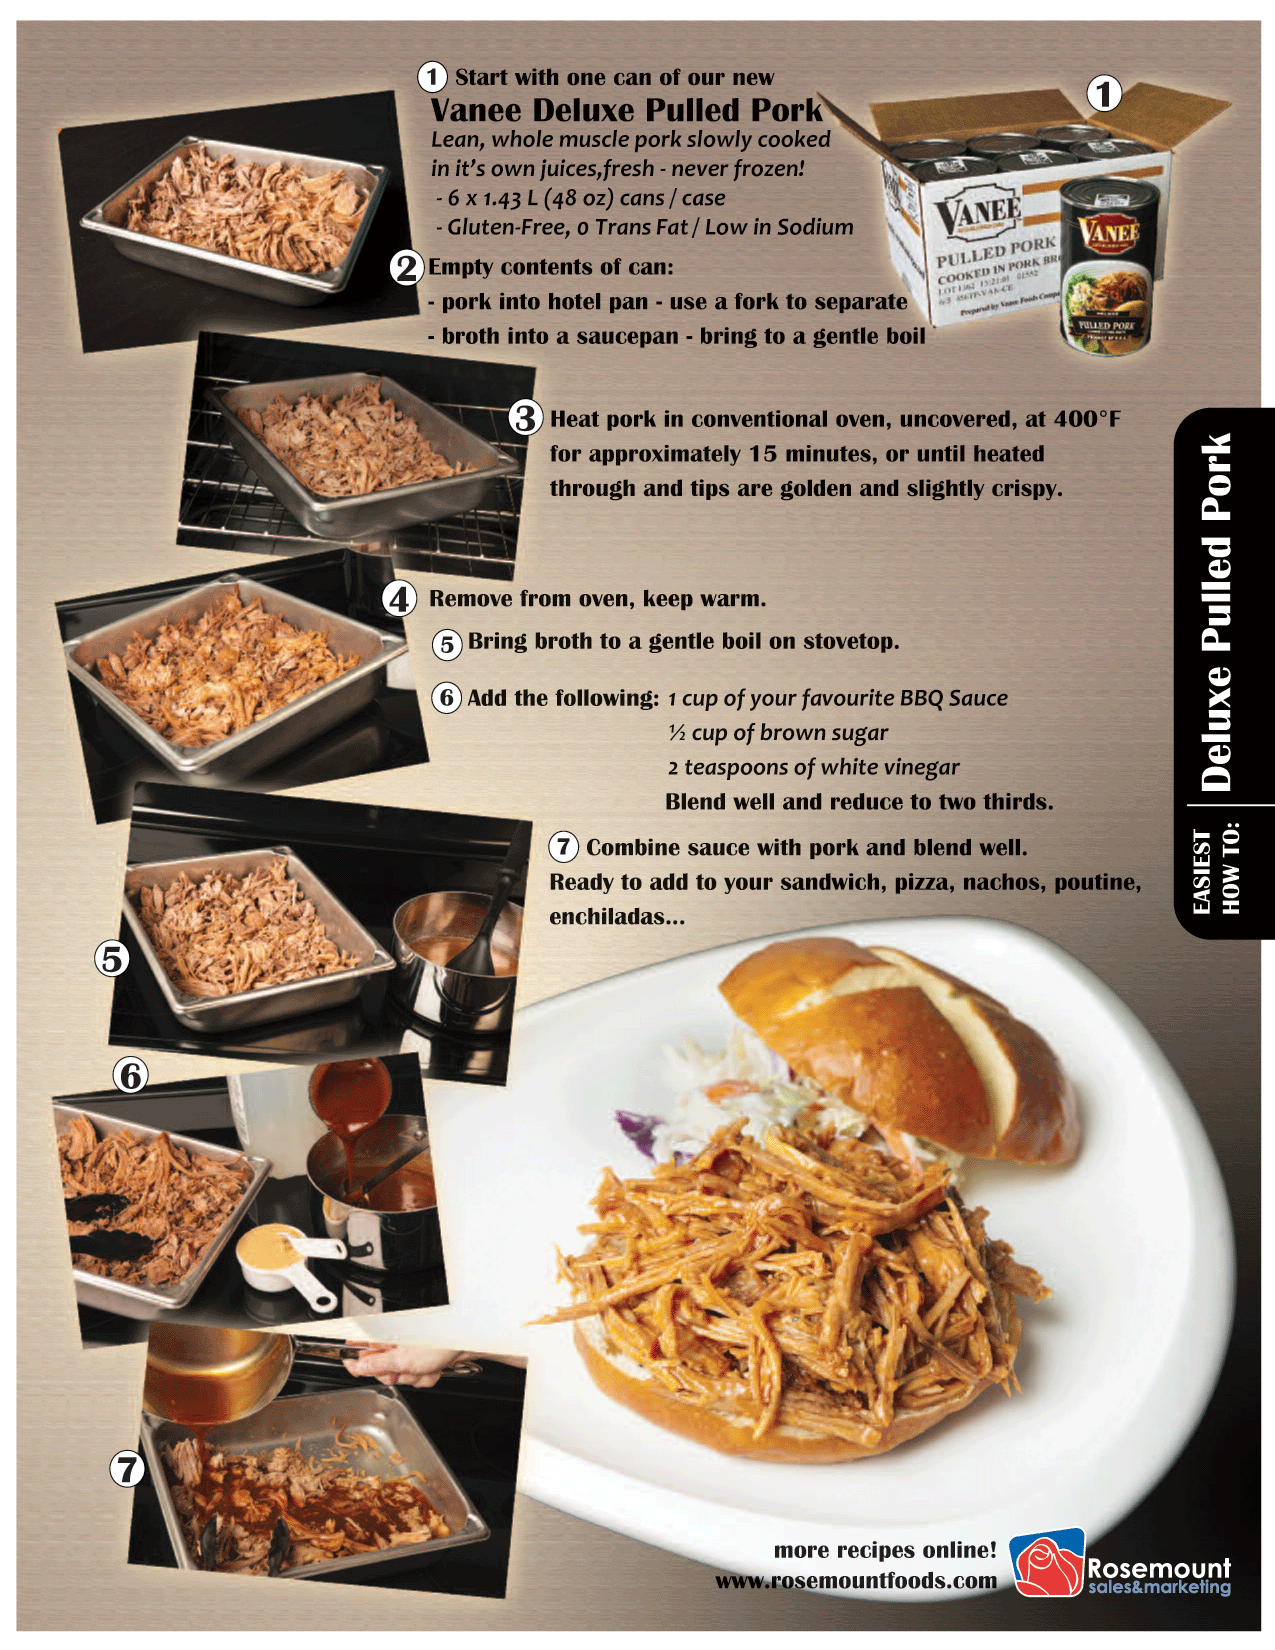 Pulled-Pork-tutorial_Layout